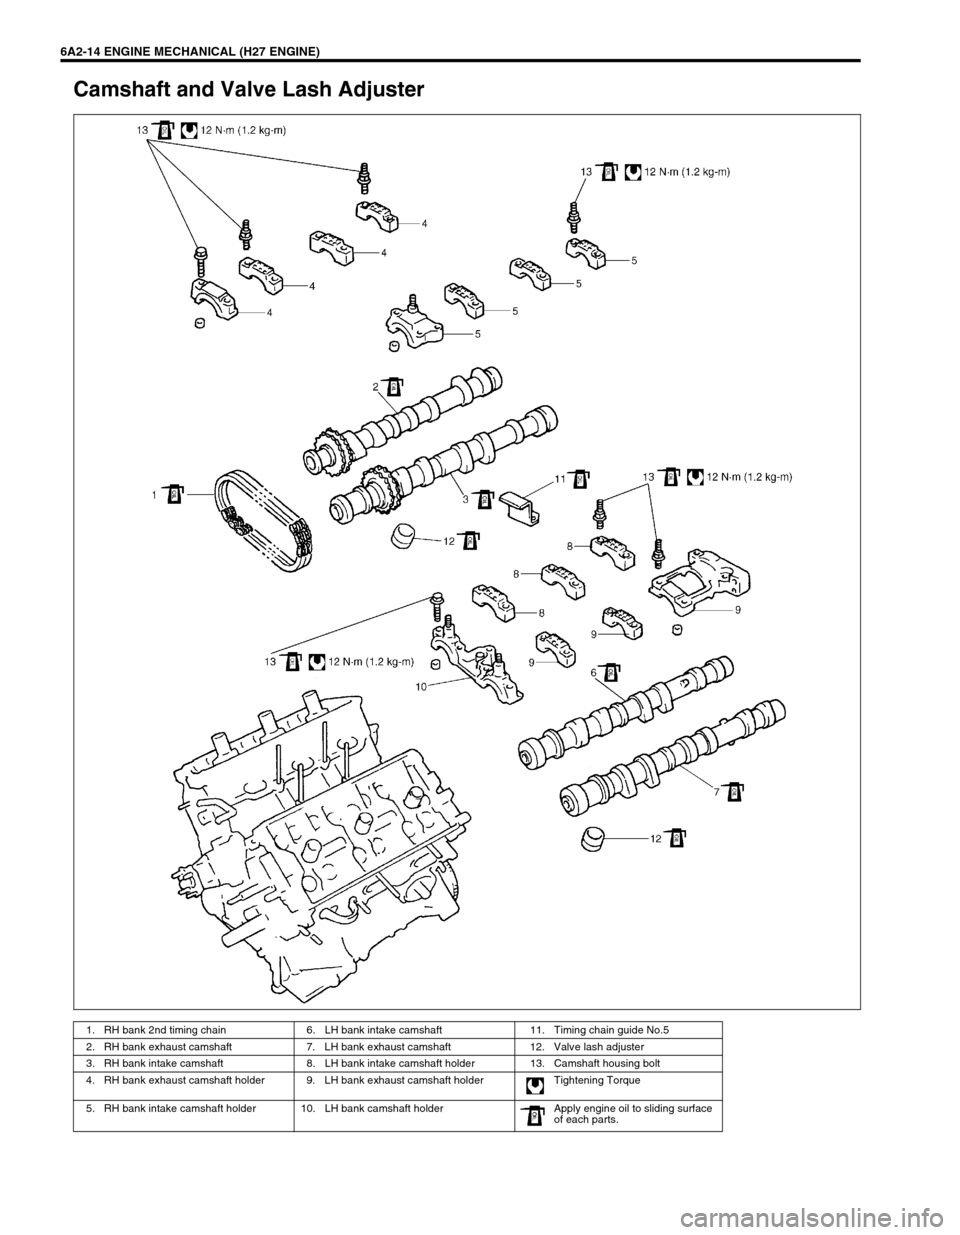 SUZUKI GRAND VITARA 1999 2.G Owners Guide 6A2-14 ENGINE MECHANICAL (H27 ENGINE)
Camshaft and Valve Lash Adjuster
1. RH bank 2nd timing chain 6. LH bank intake camshaft 11. Timing chain guide No.5
2. RH bank exhaust camshaft 7. LH bank exhaust